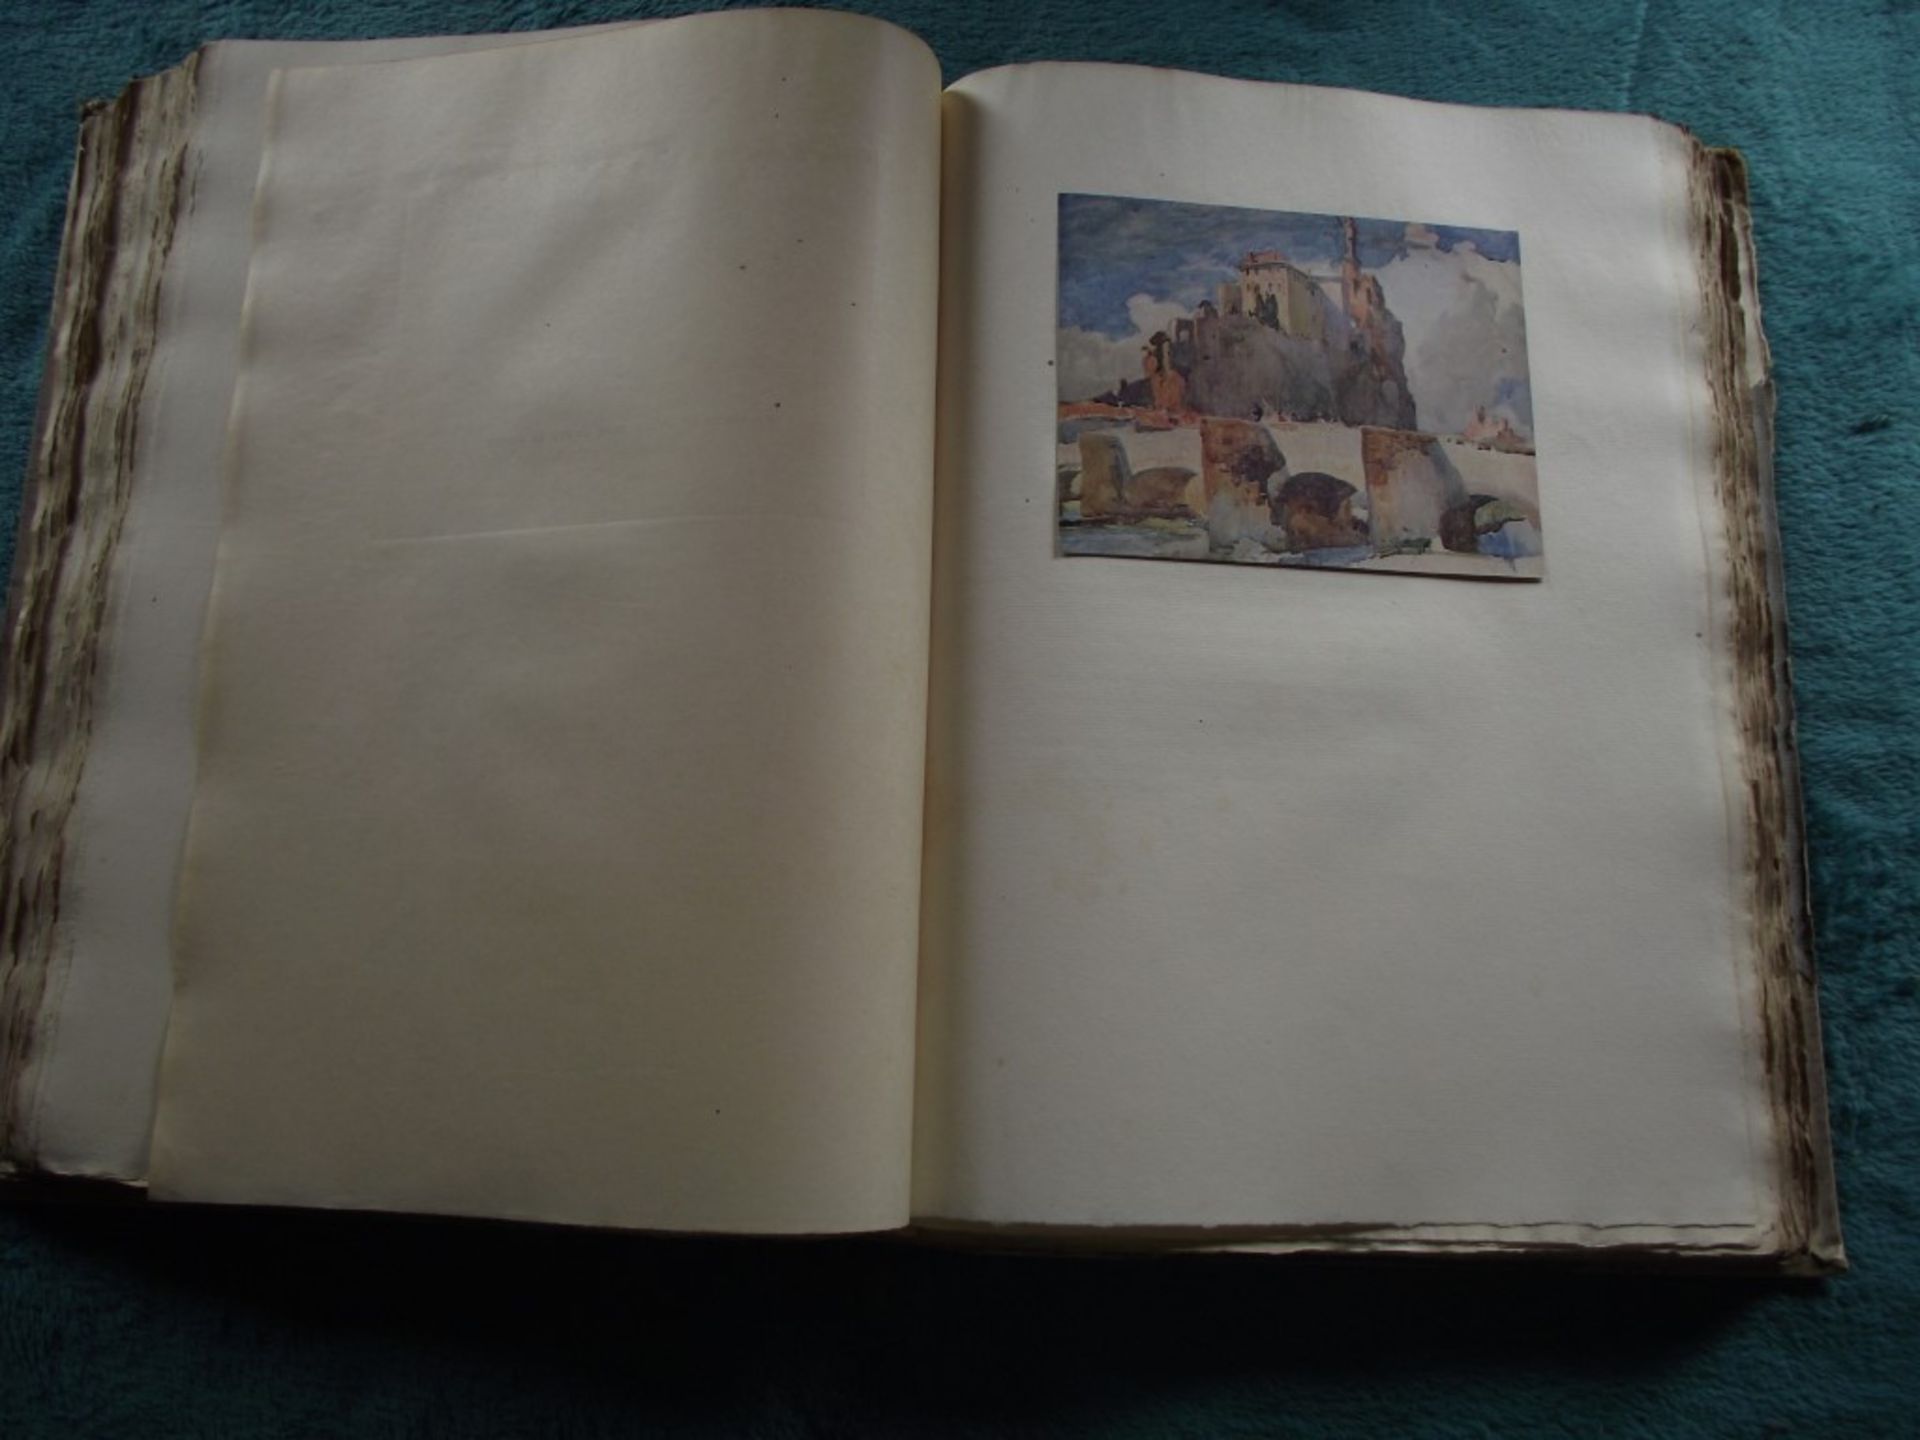 A Book of Bridges by Frank Brangwyn & Walter Shaw Sparrow - Ltd. Edit. 17/75 with Signed Lithograph. - Image 47 of 64